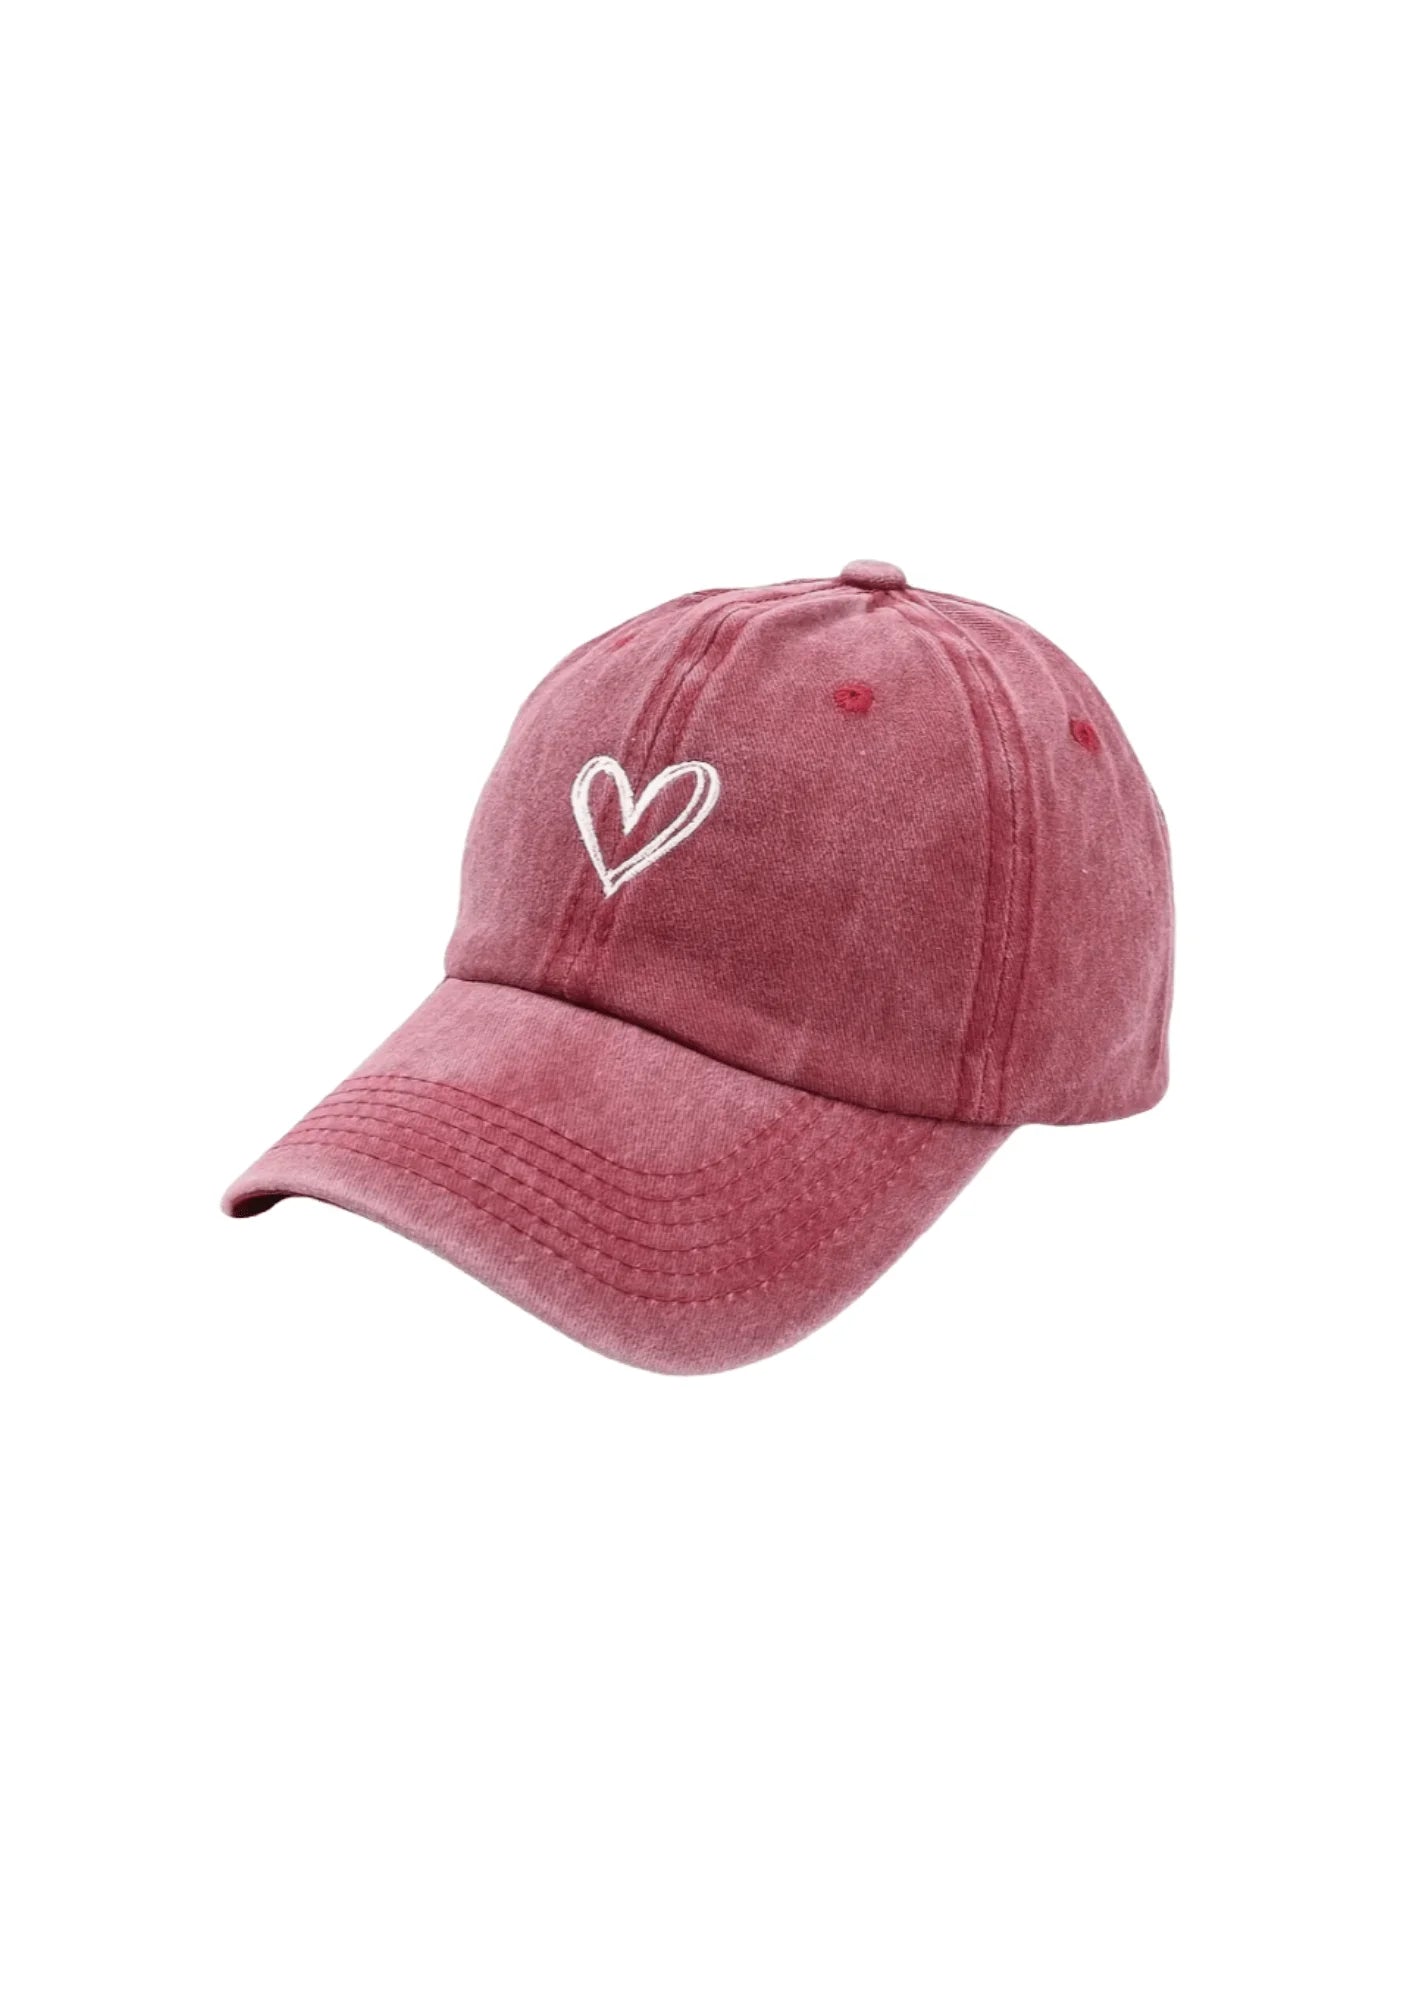 PINK EMBROIDERED HEART CAP